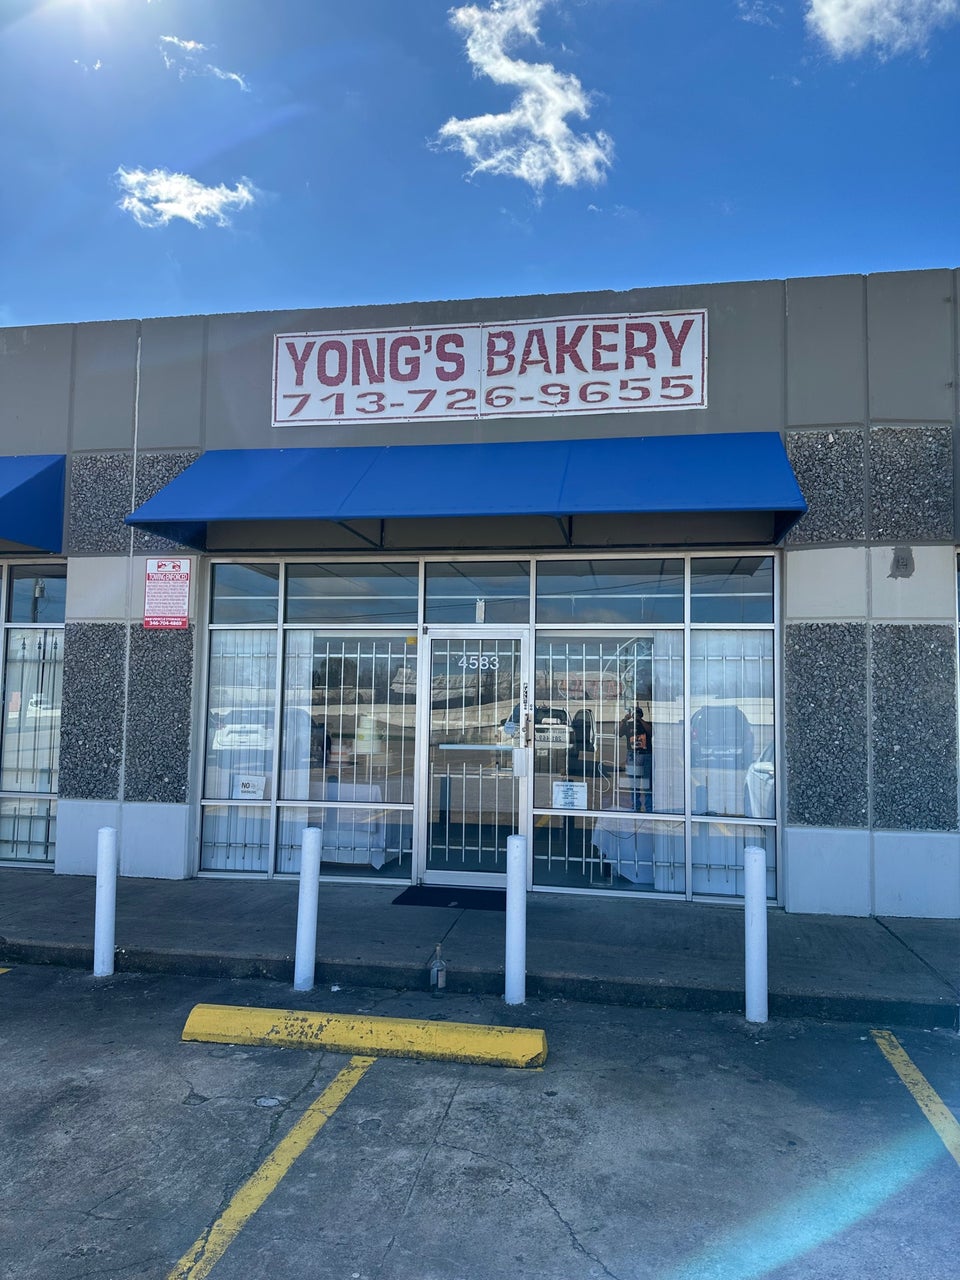 Yong's Bakery